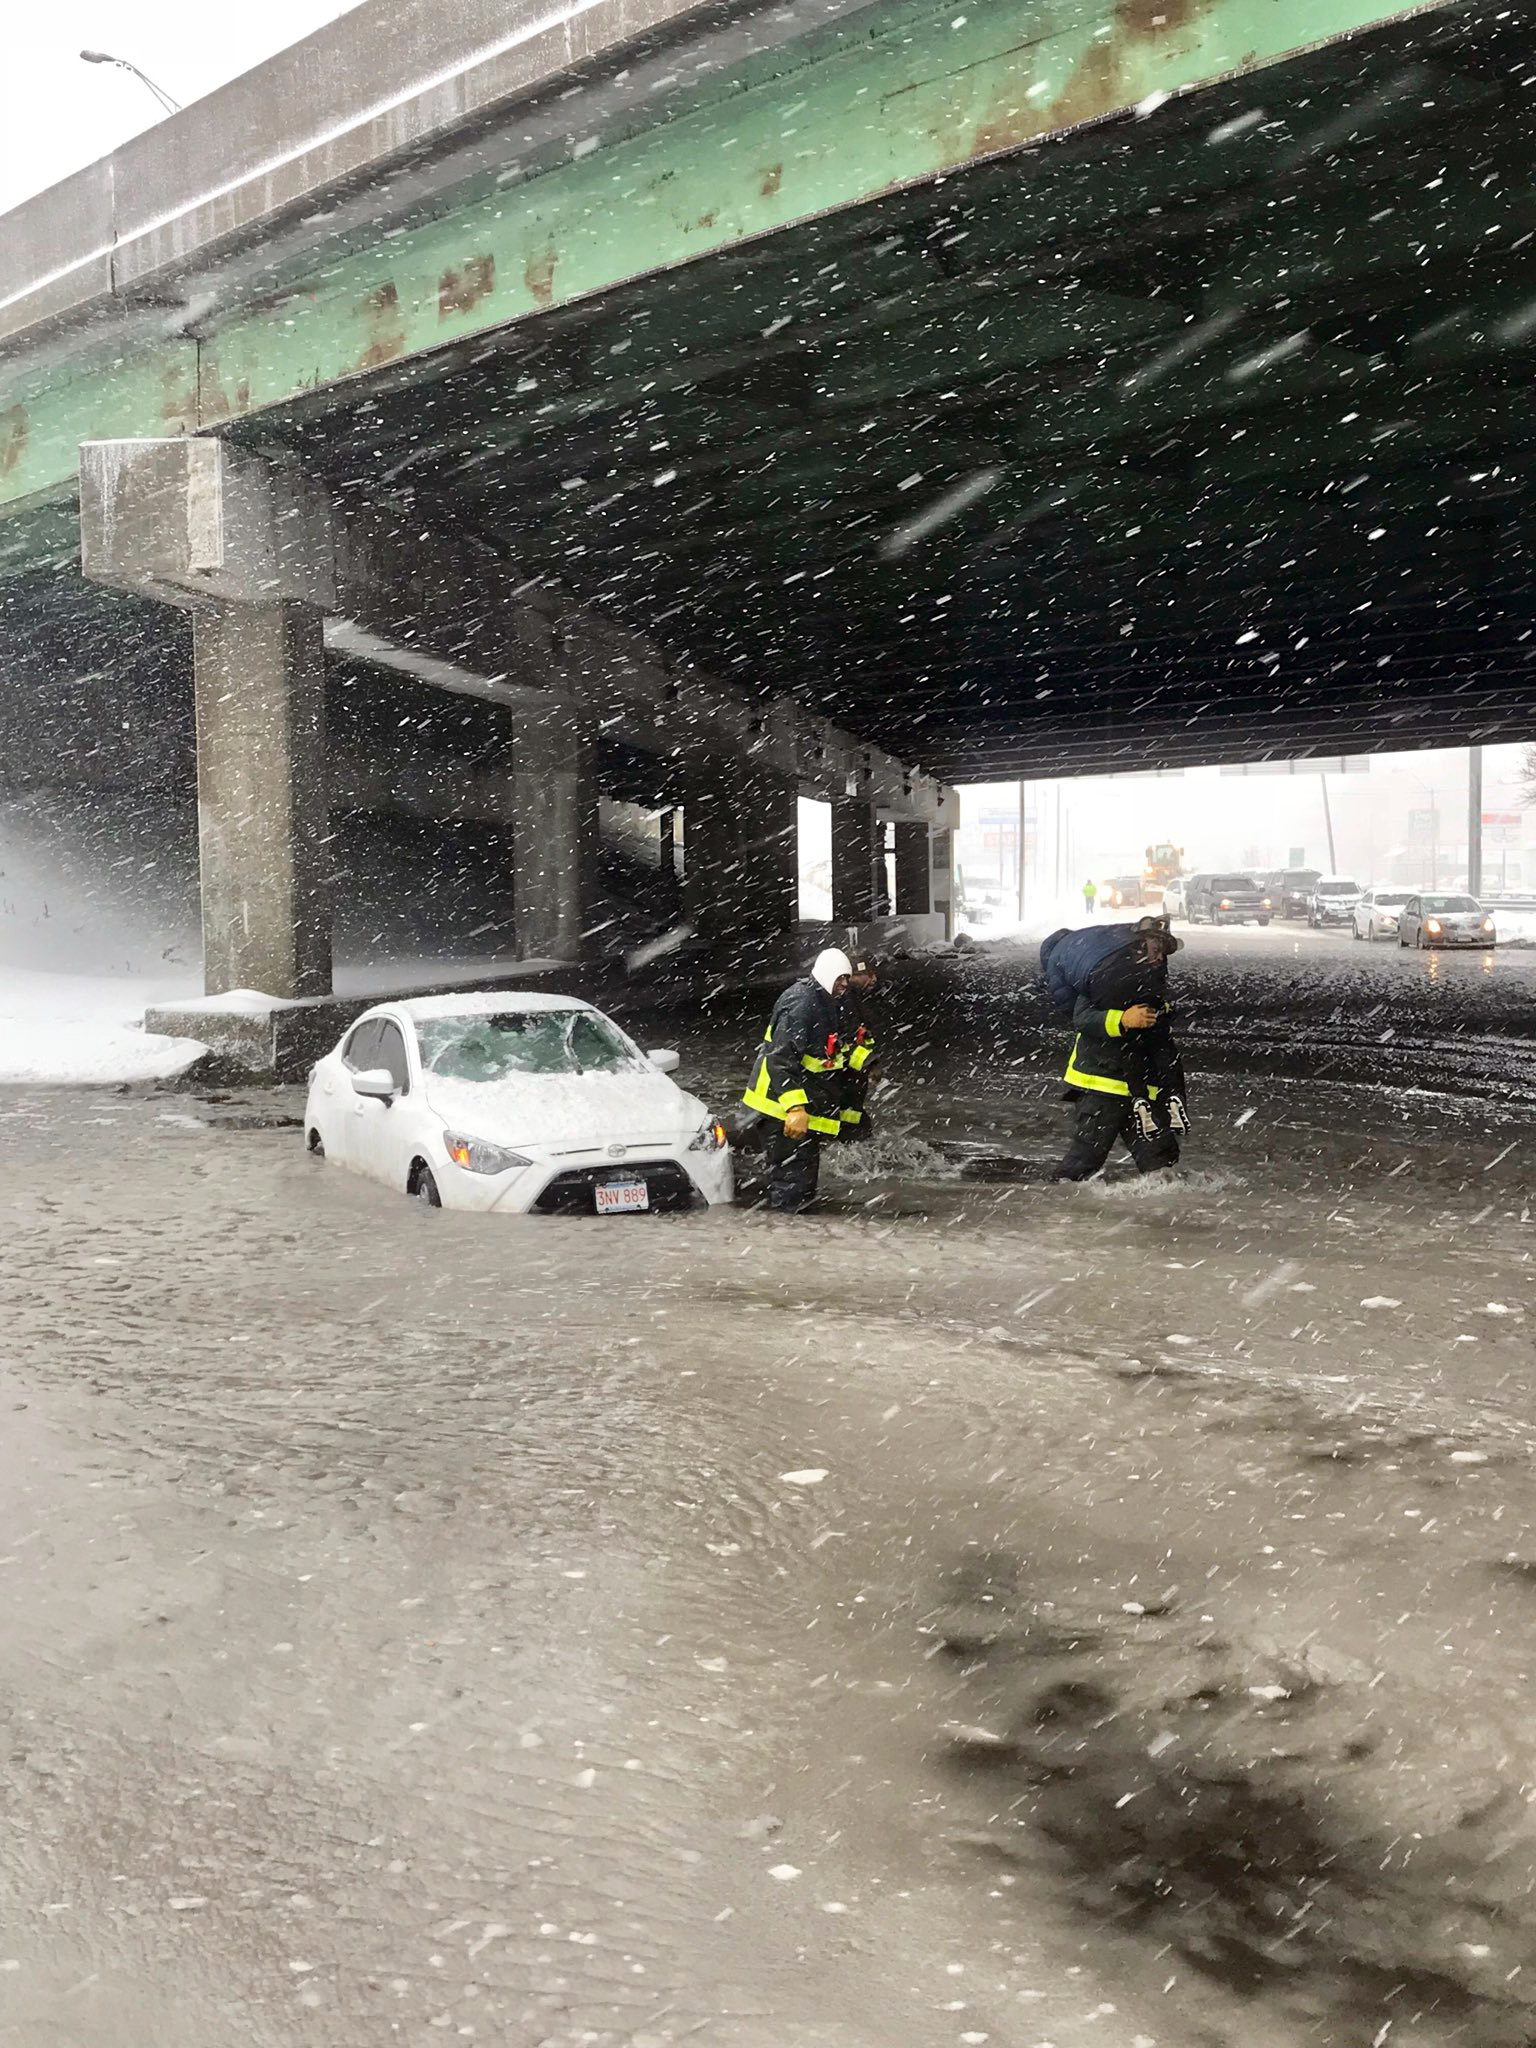 PHOTO: The Boston Fire Department shared images of Neponset Circle firefighters rescuing a driver who was trapped by rising water in Boston, Jan. 4, 2018.